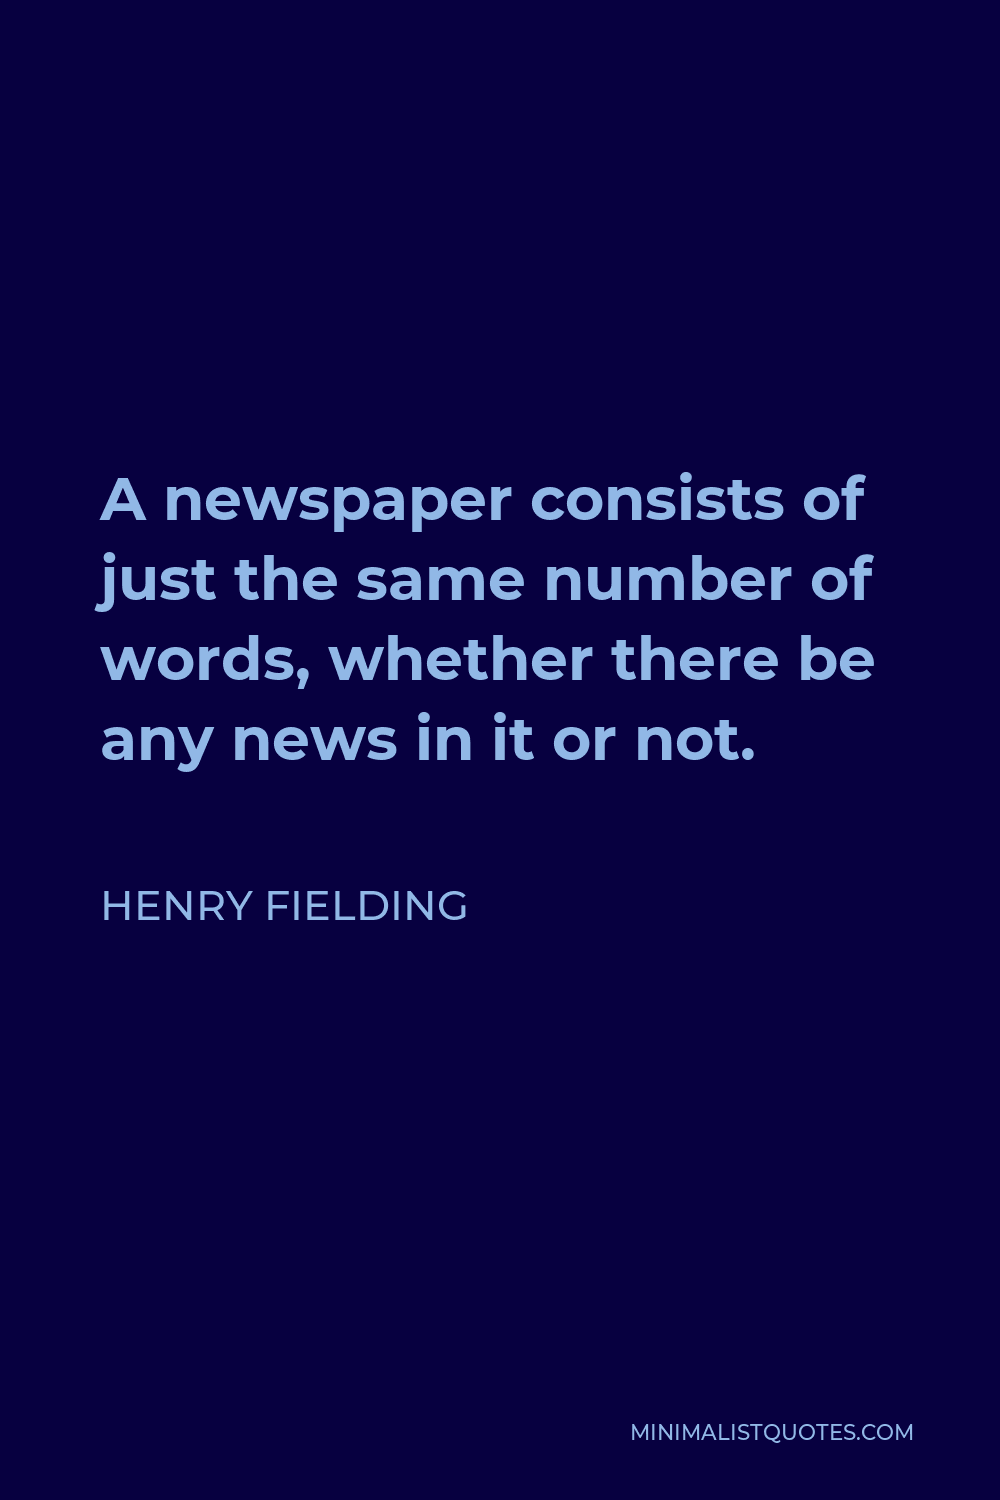 Henry Fielding Quote - A newspaper consists of just the same number of words, whether there be any news in it or not.